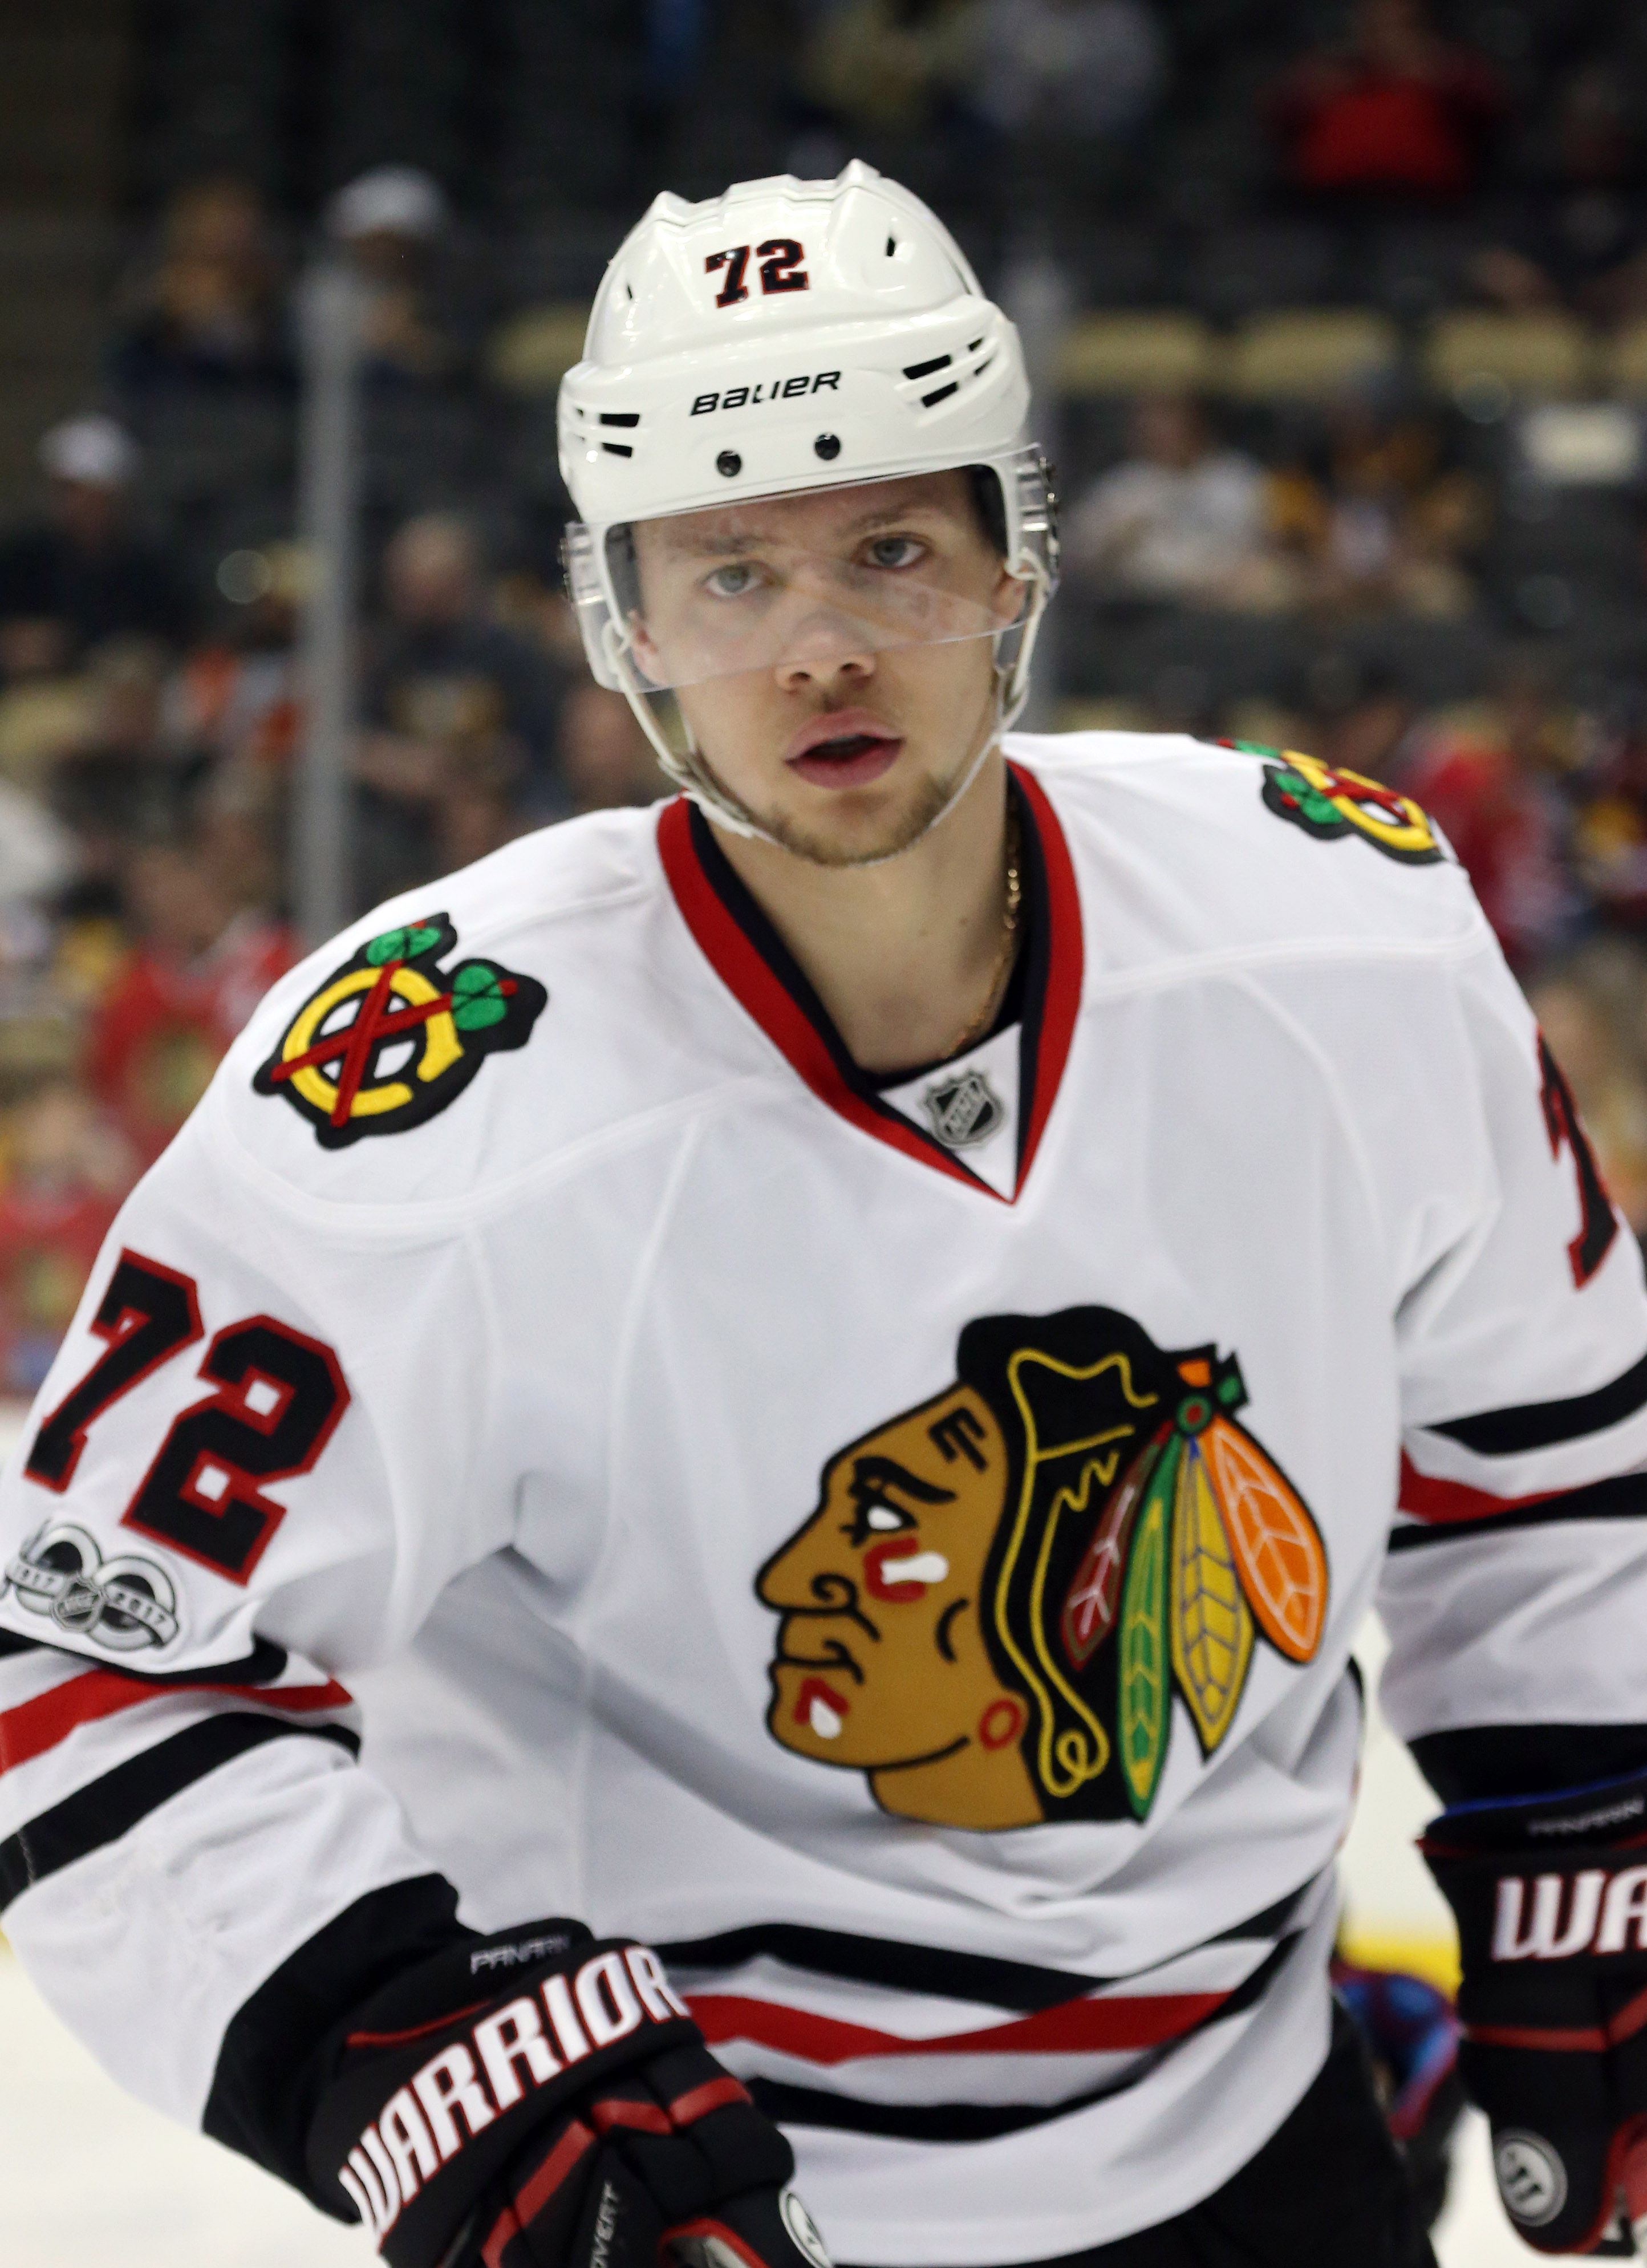 Payday: Artemi Panarin signs $12 million contract extension - The